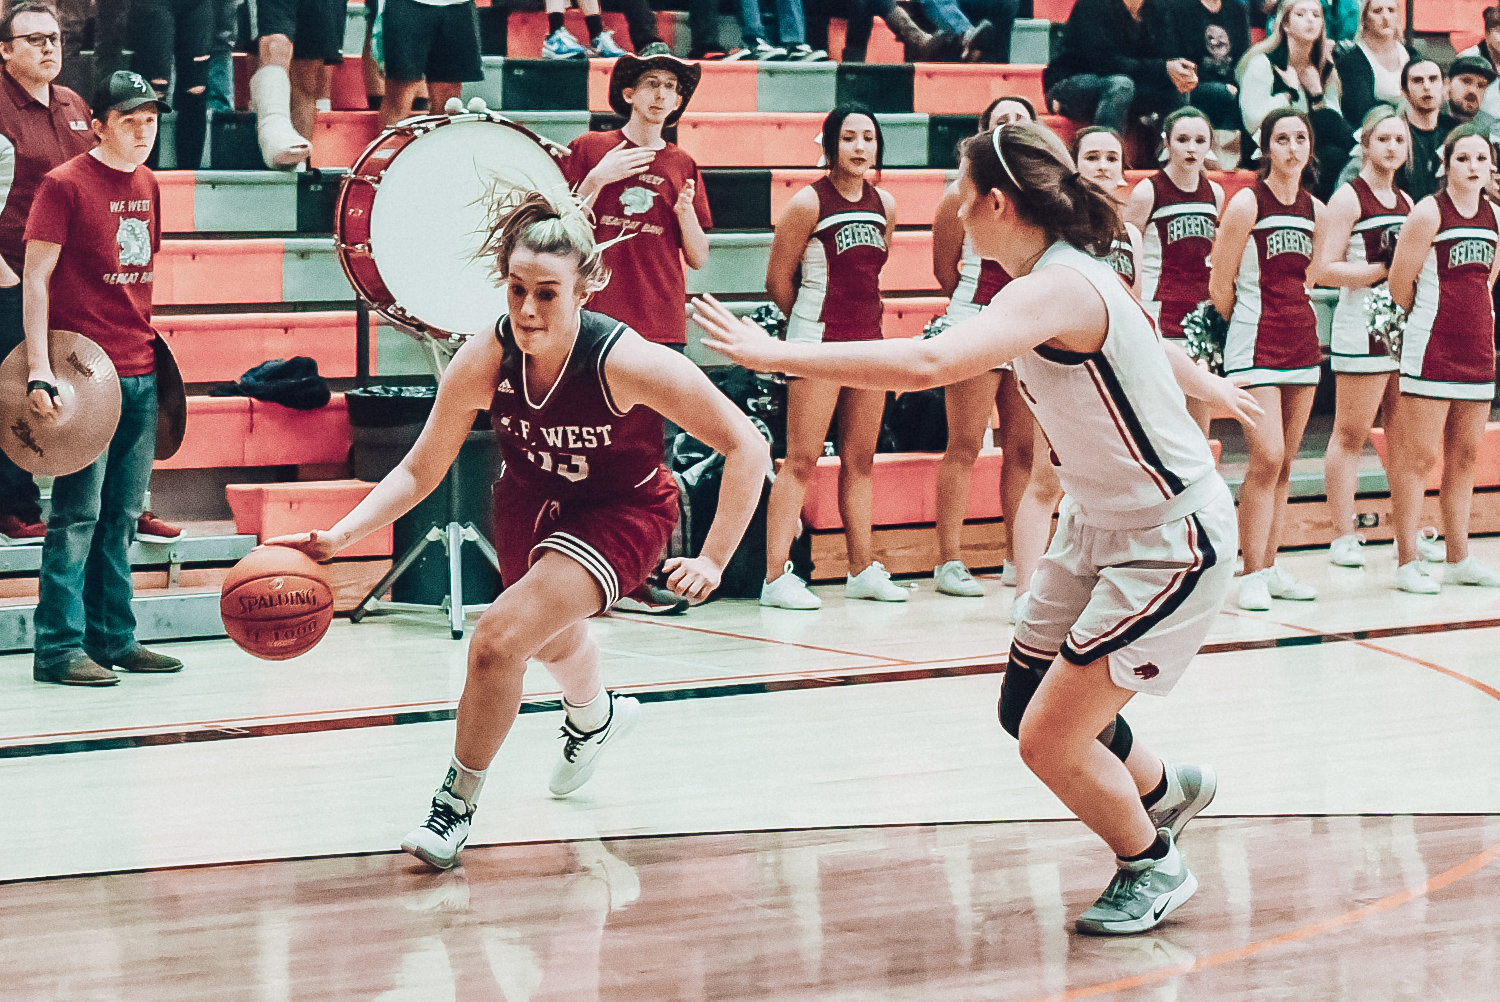 W.F. West's Annika Waring drives to the hoop against Black Hills on Friday during the District 4 2A Girls Basketball Tournament championship game in Battle Ground.